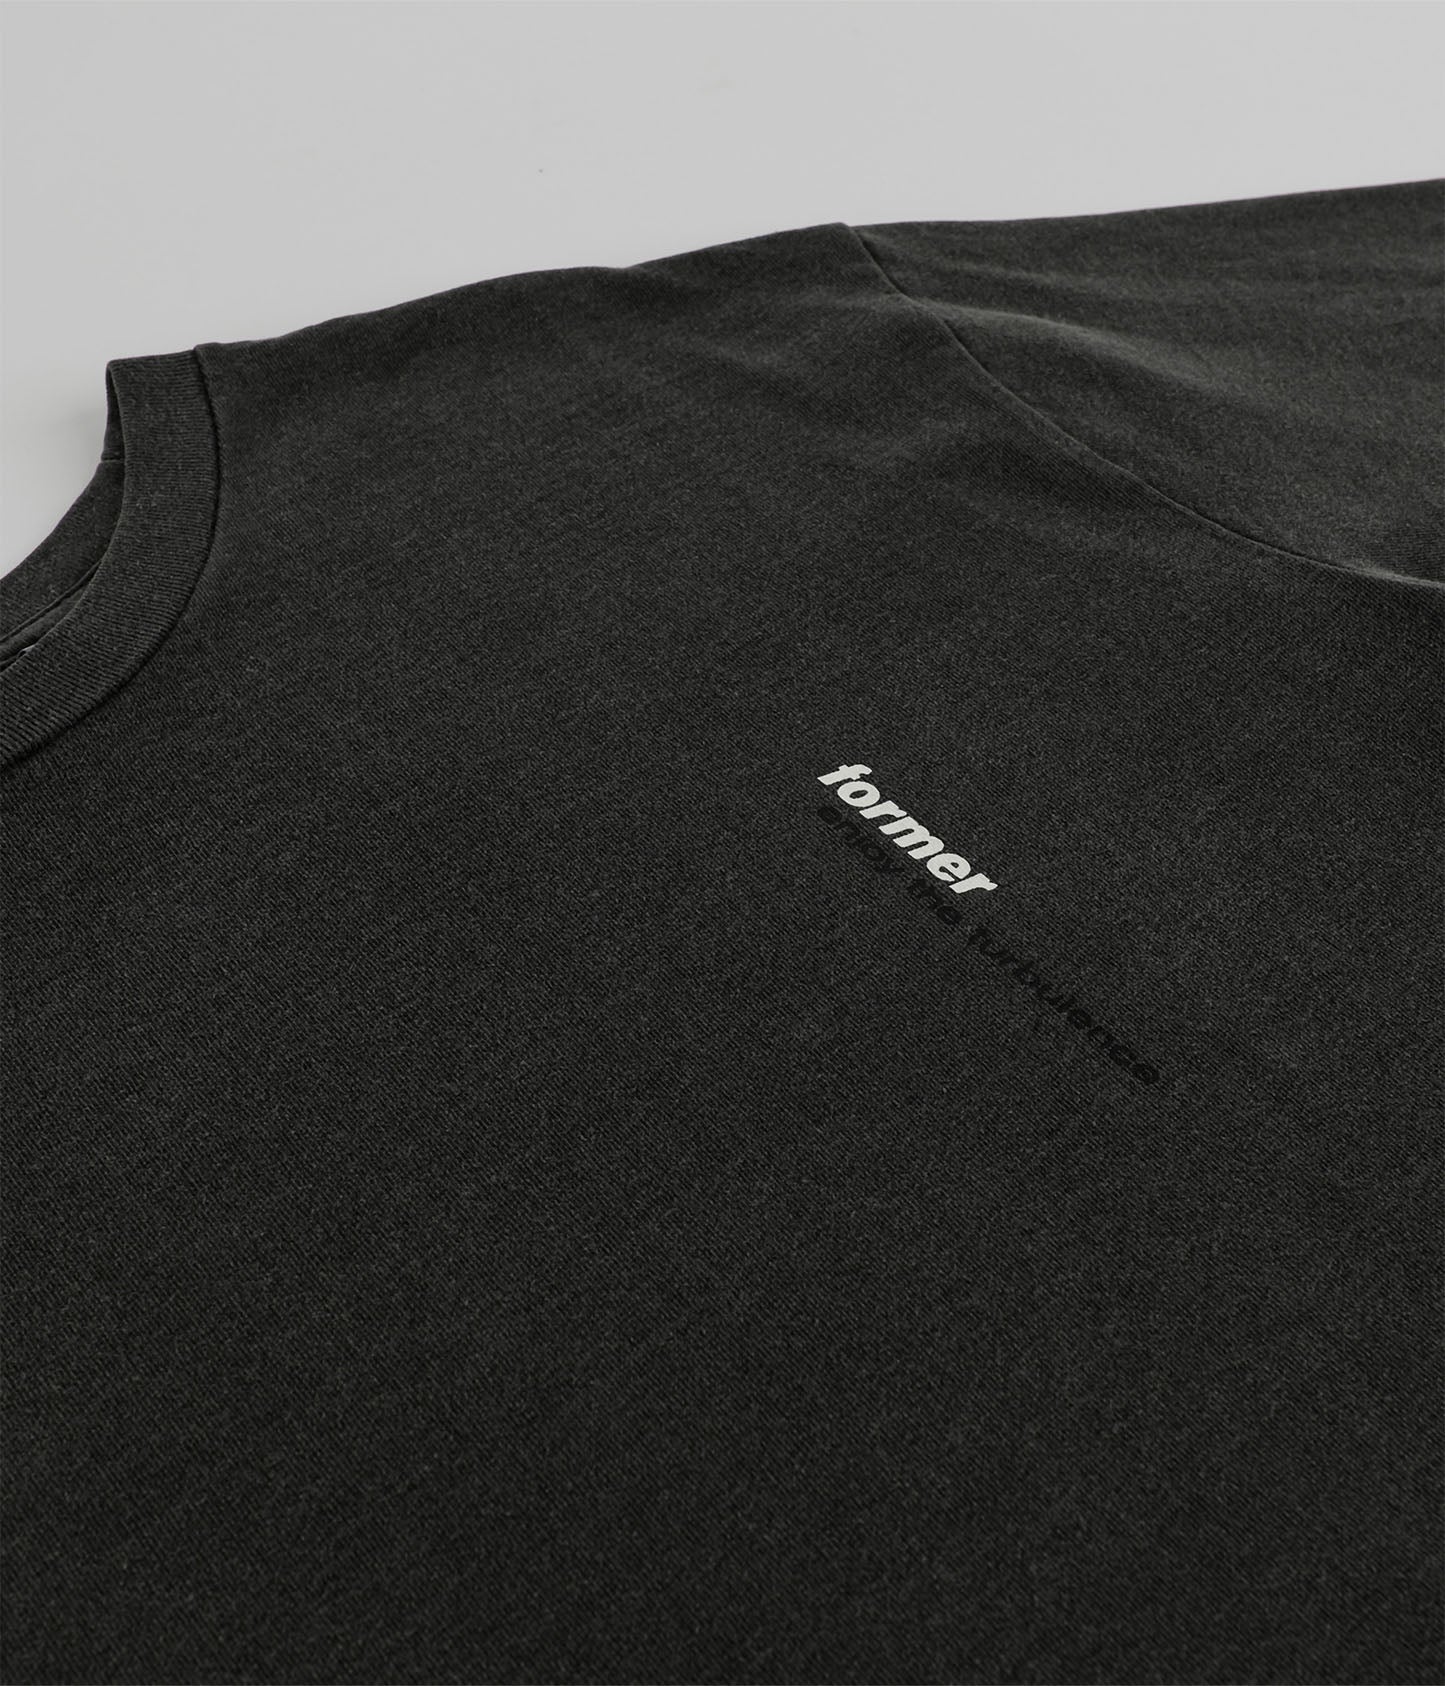 ALL PURPOSE T-SHIRT | WASHED BLACK